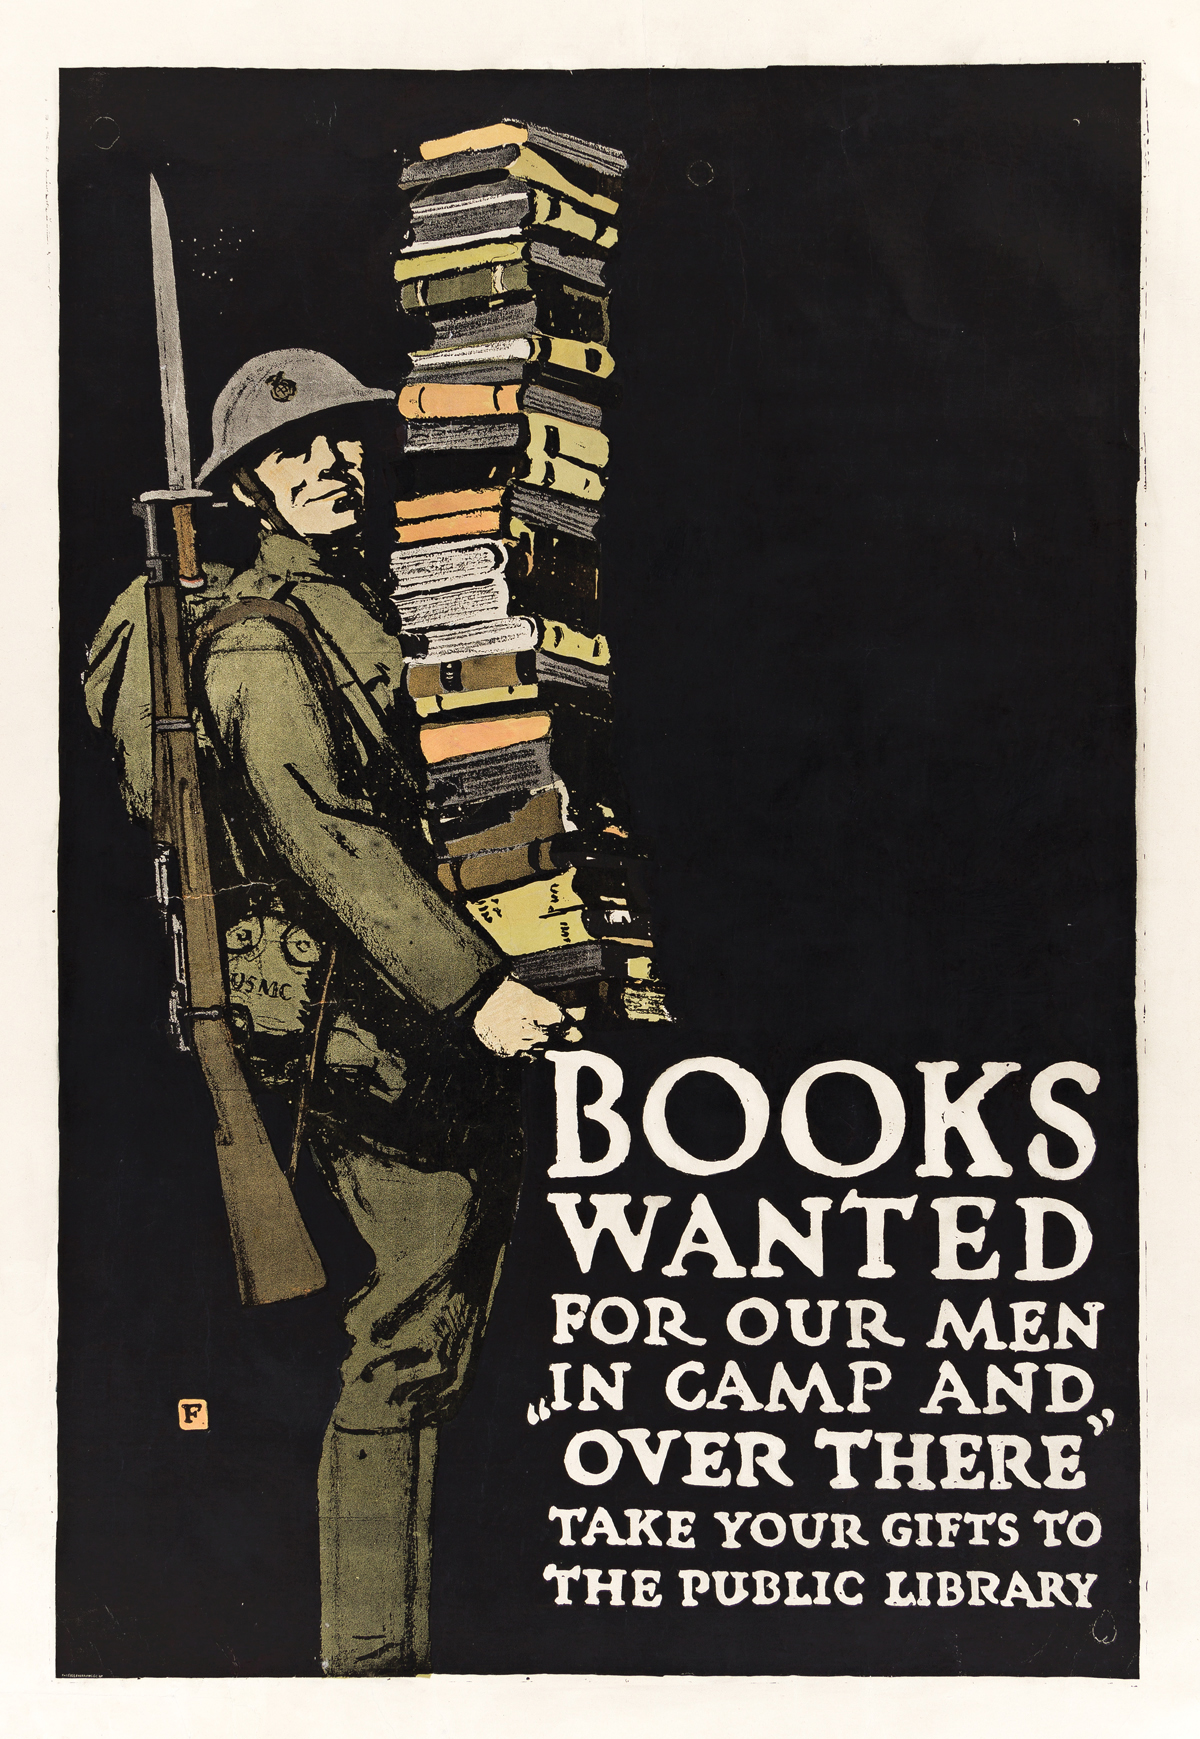 CHARLES BUCKLES FALLS (1874-1960).  BOOKS WANTED FOR OUR MEN IN CAMP AND OVER THERE. Circa 1918. 41¼x28 inches, 104¾x71 cm. The Gill